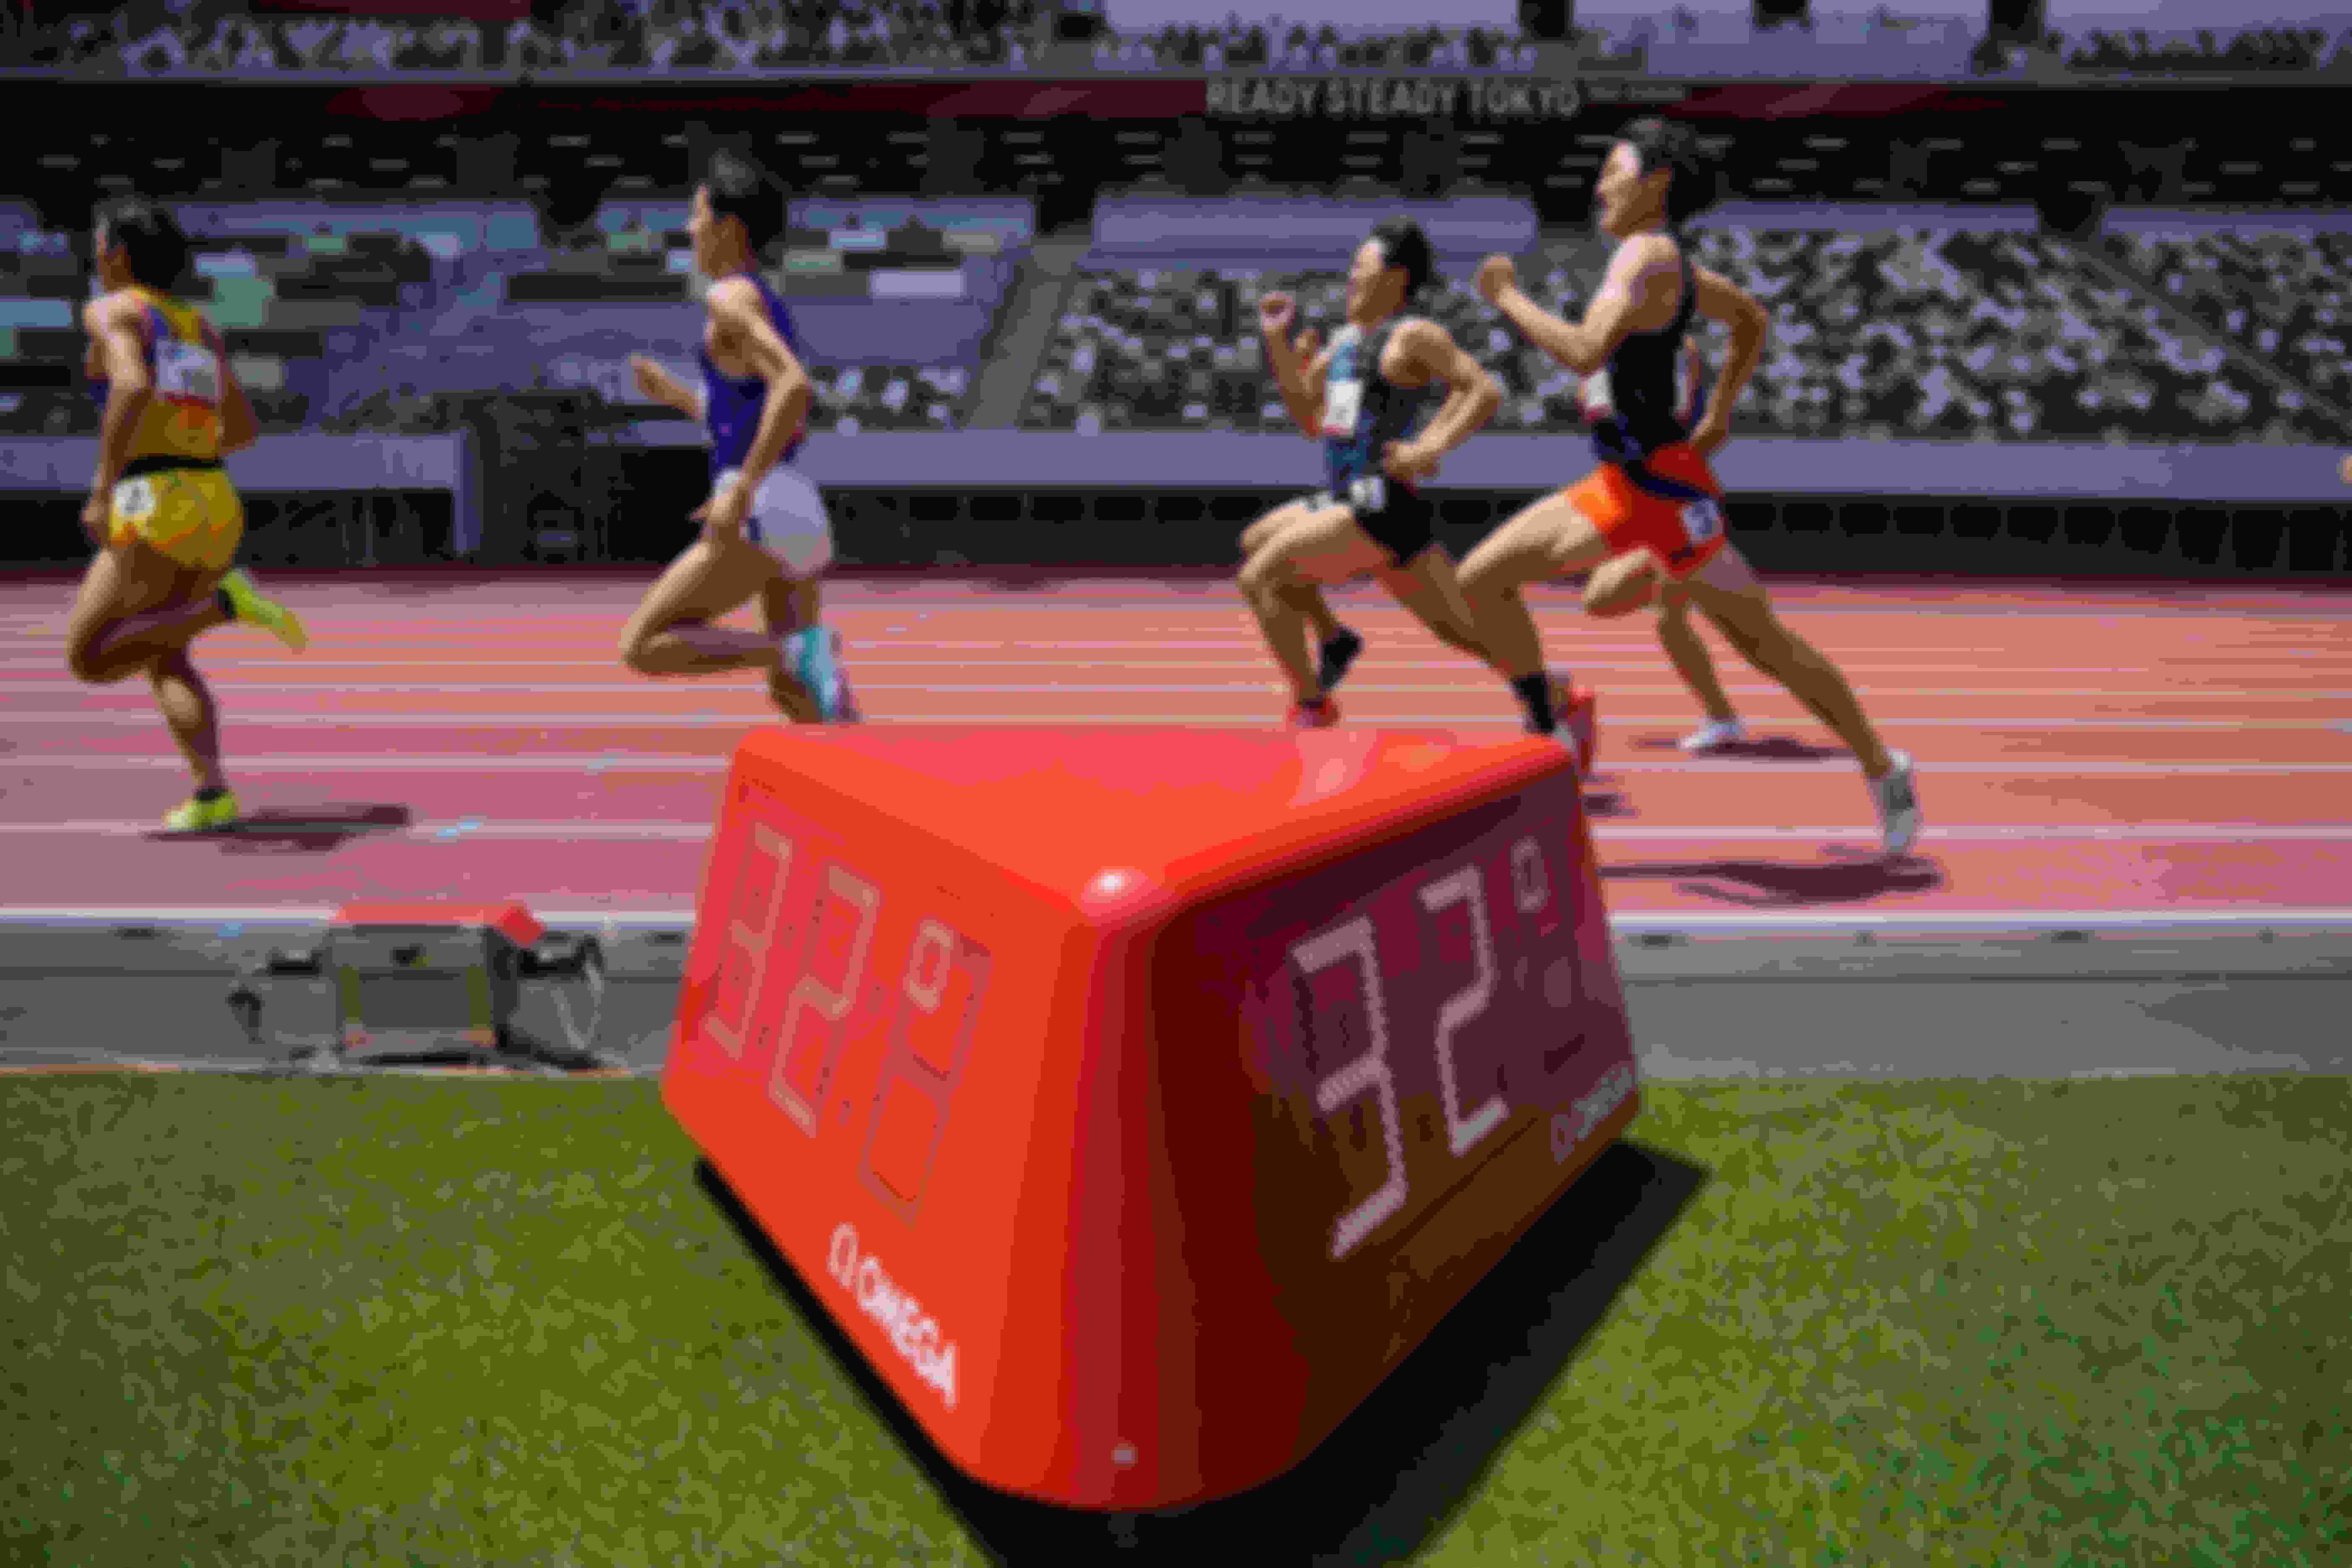 The Olympic Stadium housed its final athletics test event before the Tokyo Games open on 23 July.